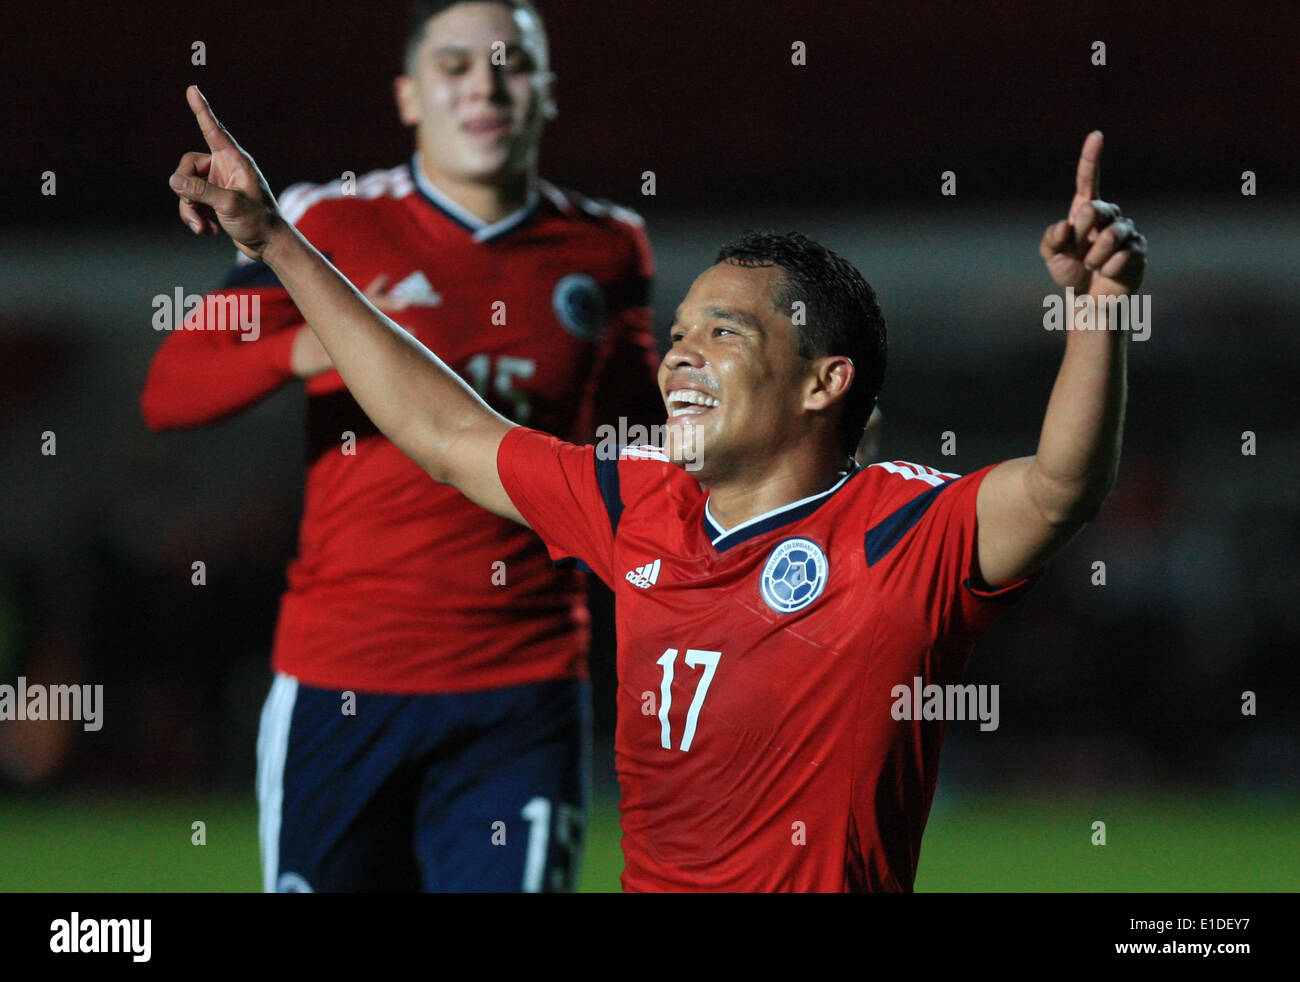 Buenos Aires, Argentina. 31st May, 2014. Carlos Bacca (Front) of Colombia celebrates his goal with teammates during a friendly soccer match against Senegal in Buenos Aires, capital of Argentina, on May 31, 2014. © Martin Zabala/Xinhua/Alamy Live News Stock Photo